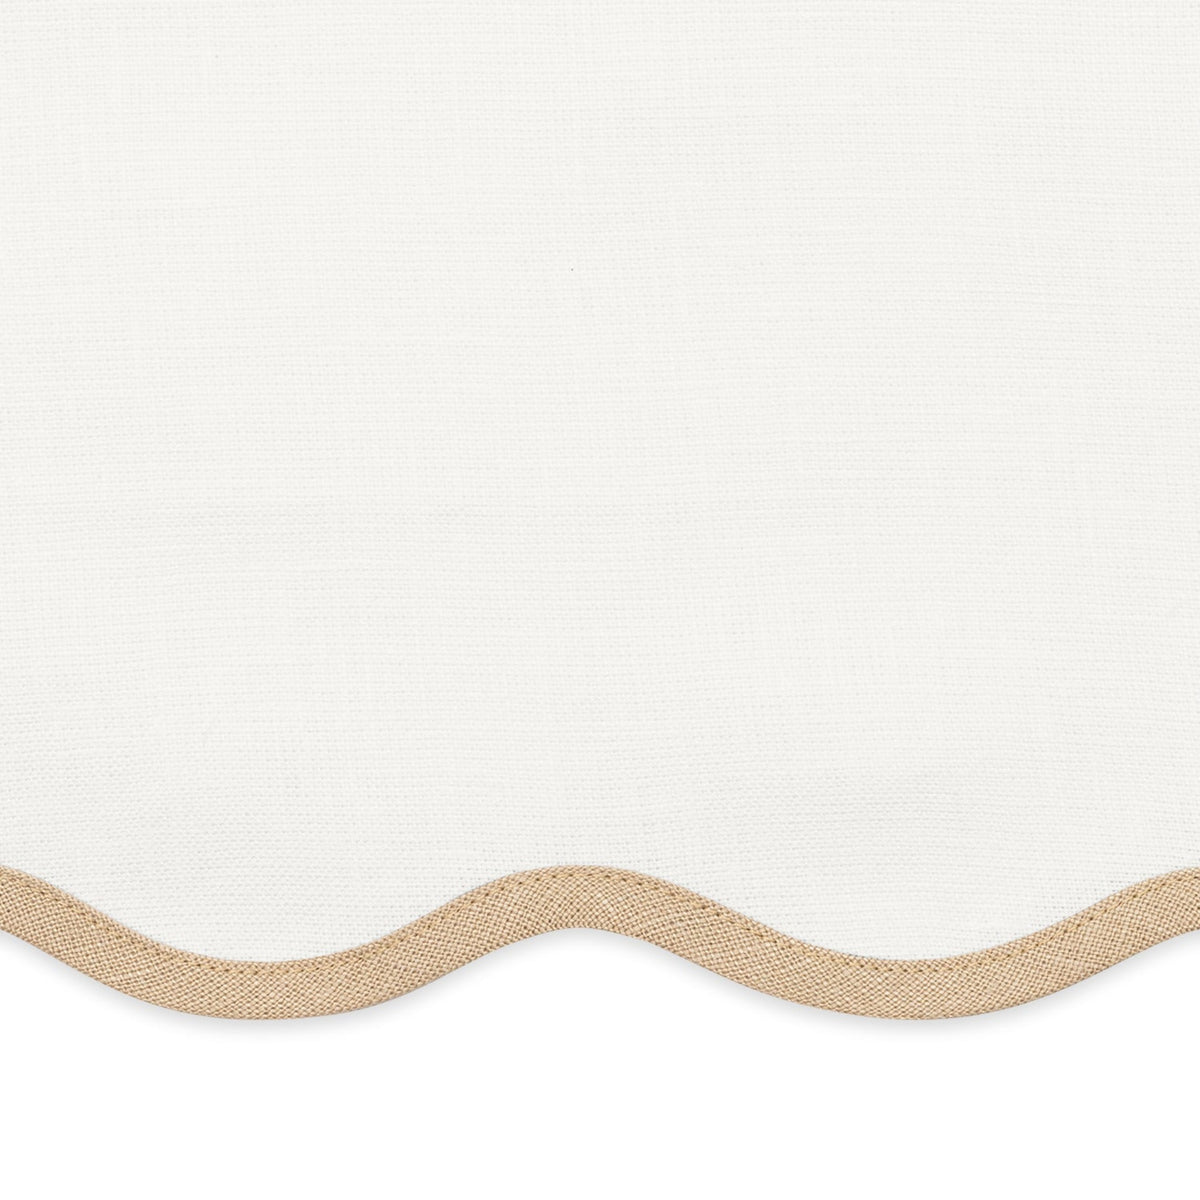 Swatch Sample of Matouk Scallop Edge Table Linens in Oat Color